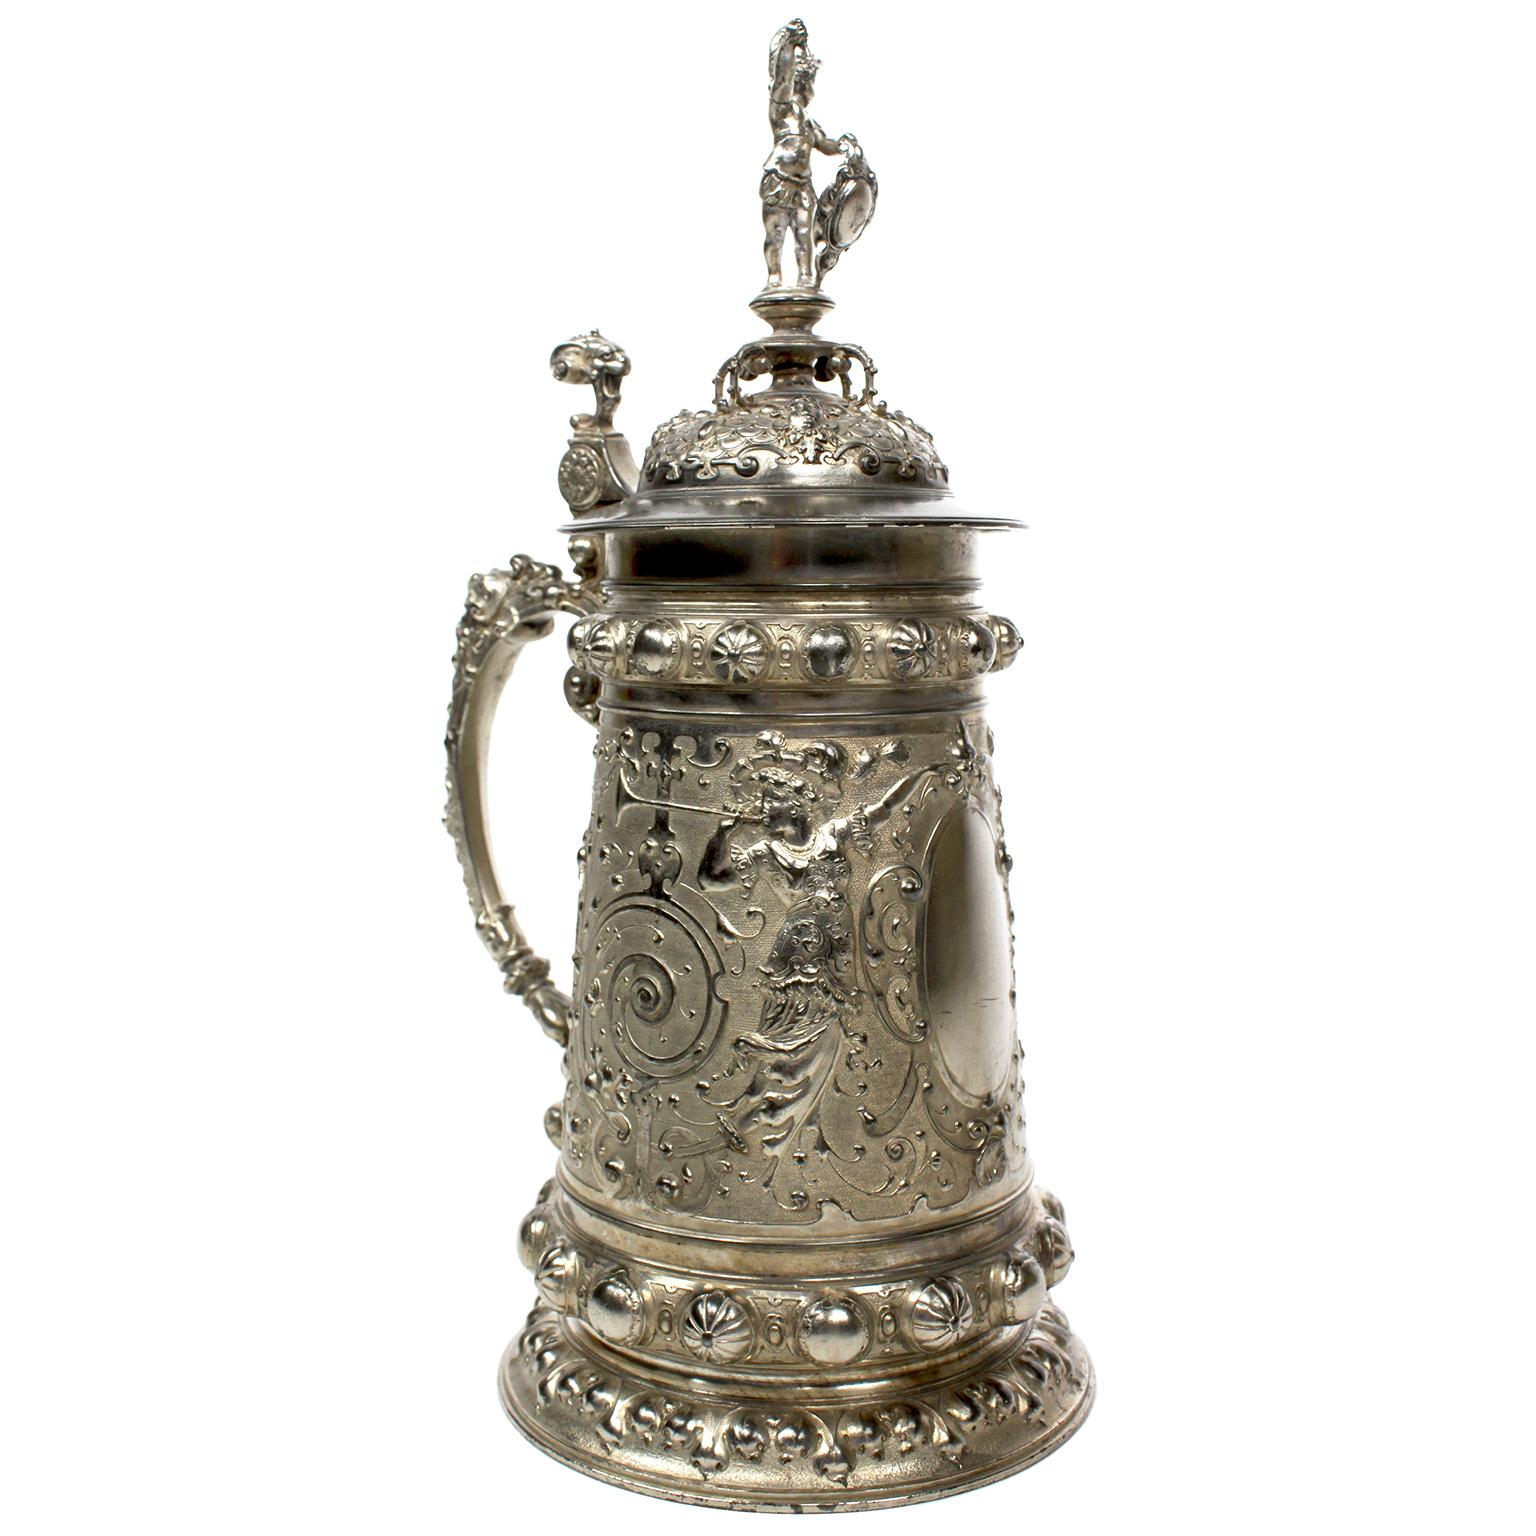 A Fine and Elaborate German 19th Century Renaissance Revival Style Britannia Silver Plated Beer-Tankard by The Württembergische Metallwarenfabrik (WMF). The tall ovoid mug engraved throughout with figures of maidens blowing trumpets, leaves, vines,